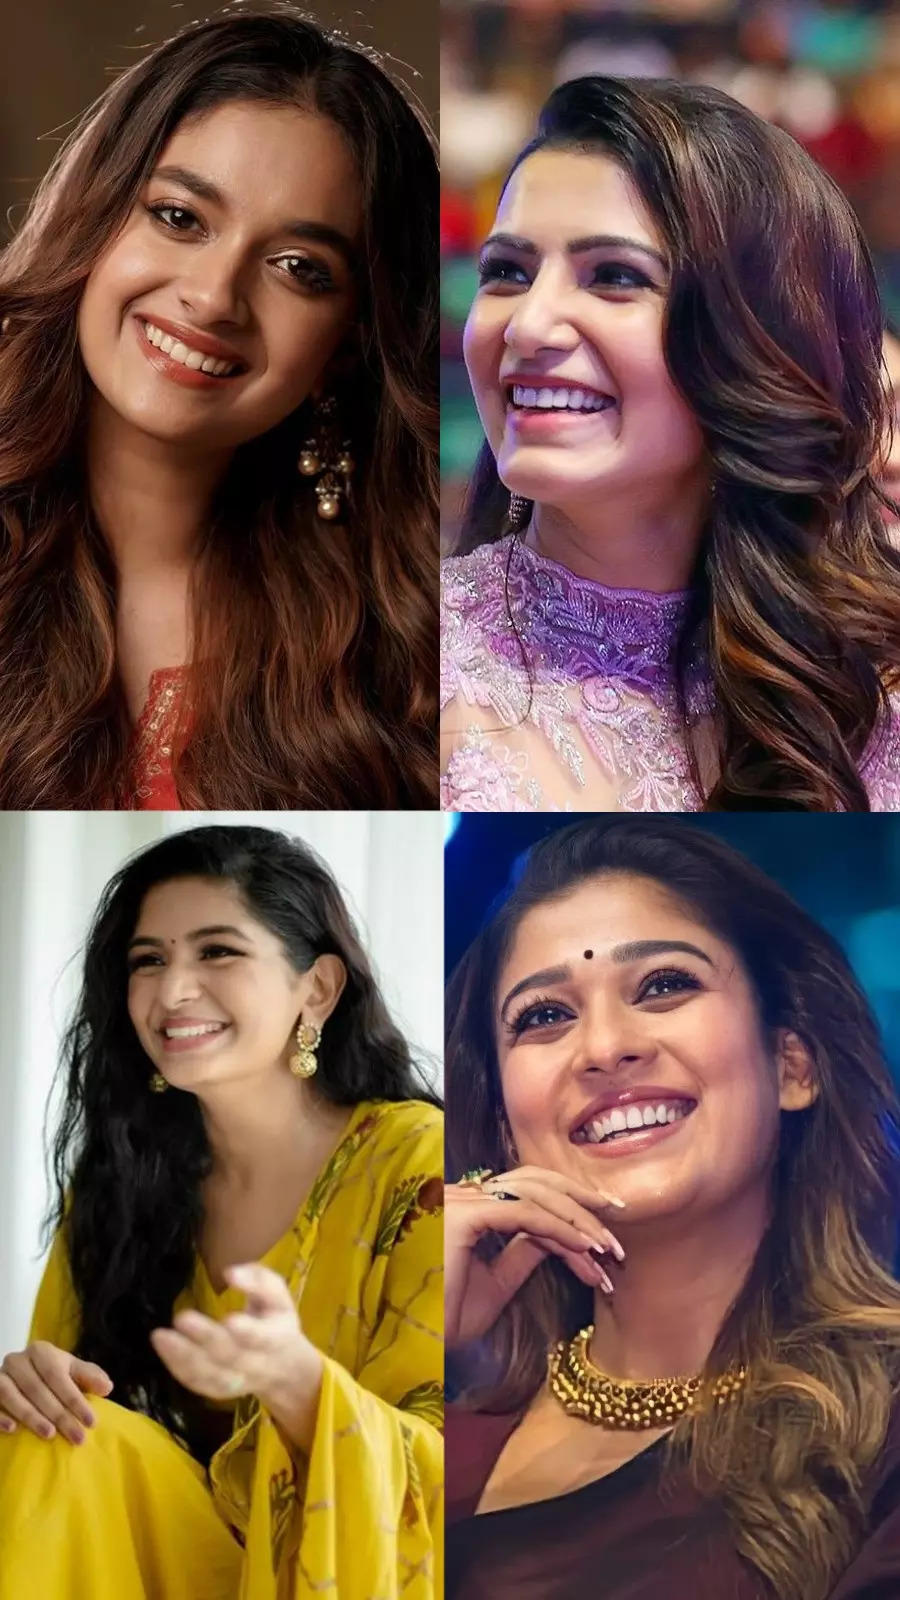 Kollywood divas with beautiful smiles | Times of India